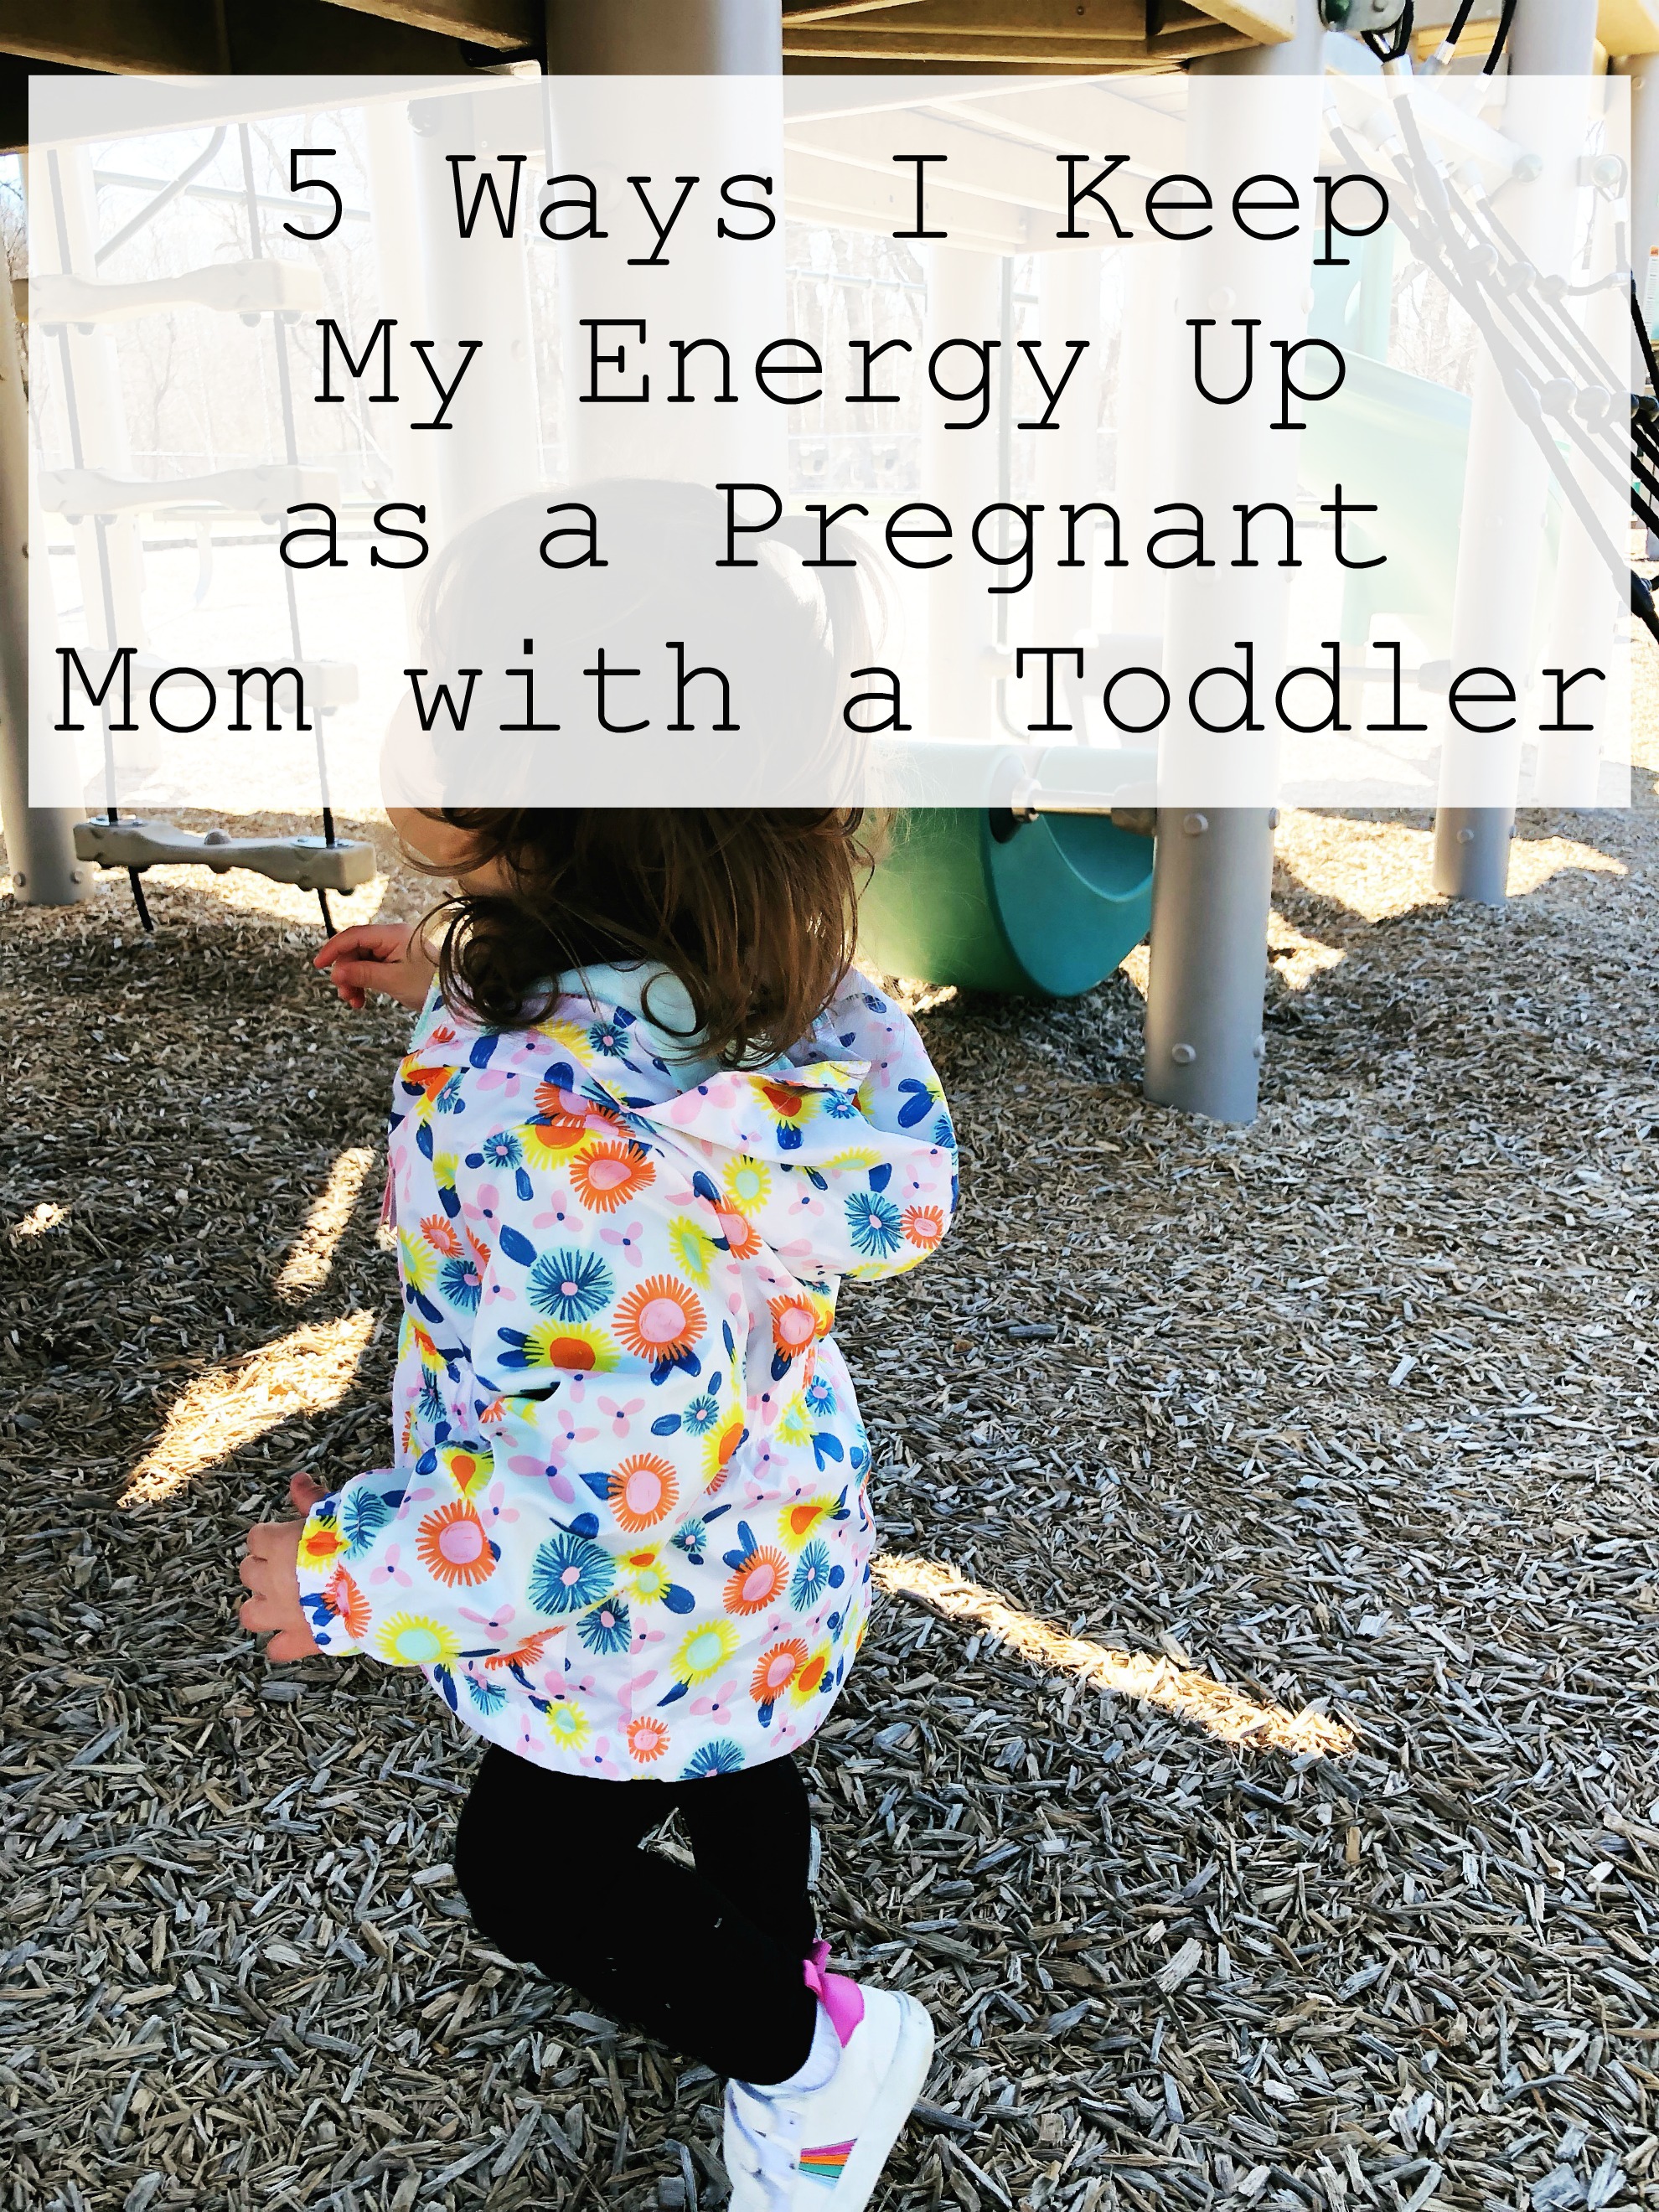 5 Ways I Keep My Energy Up as a Pregnant Mom with Toddler